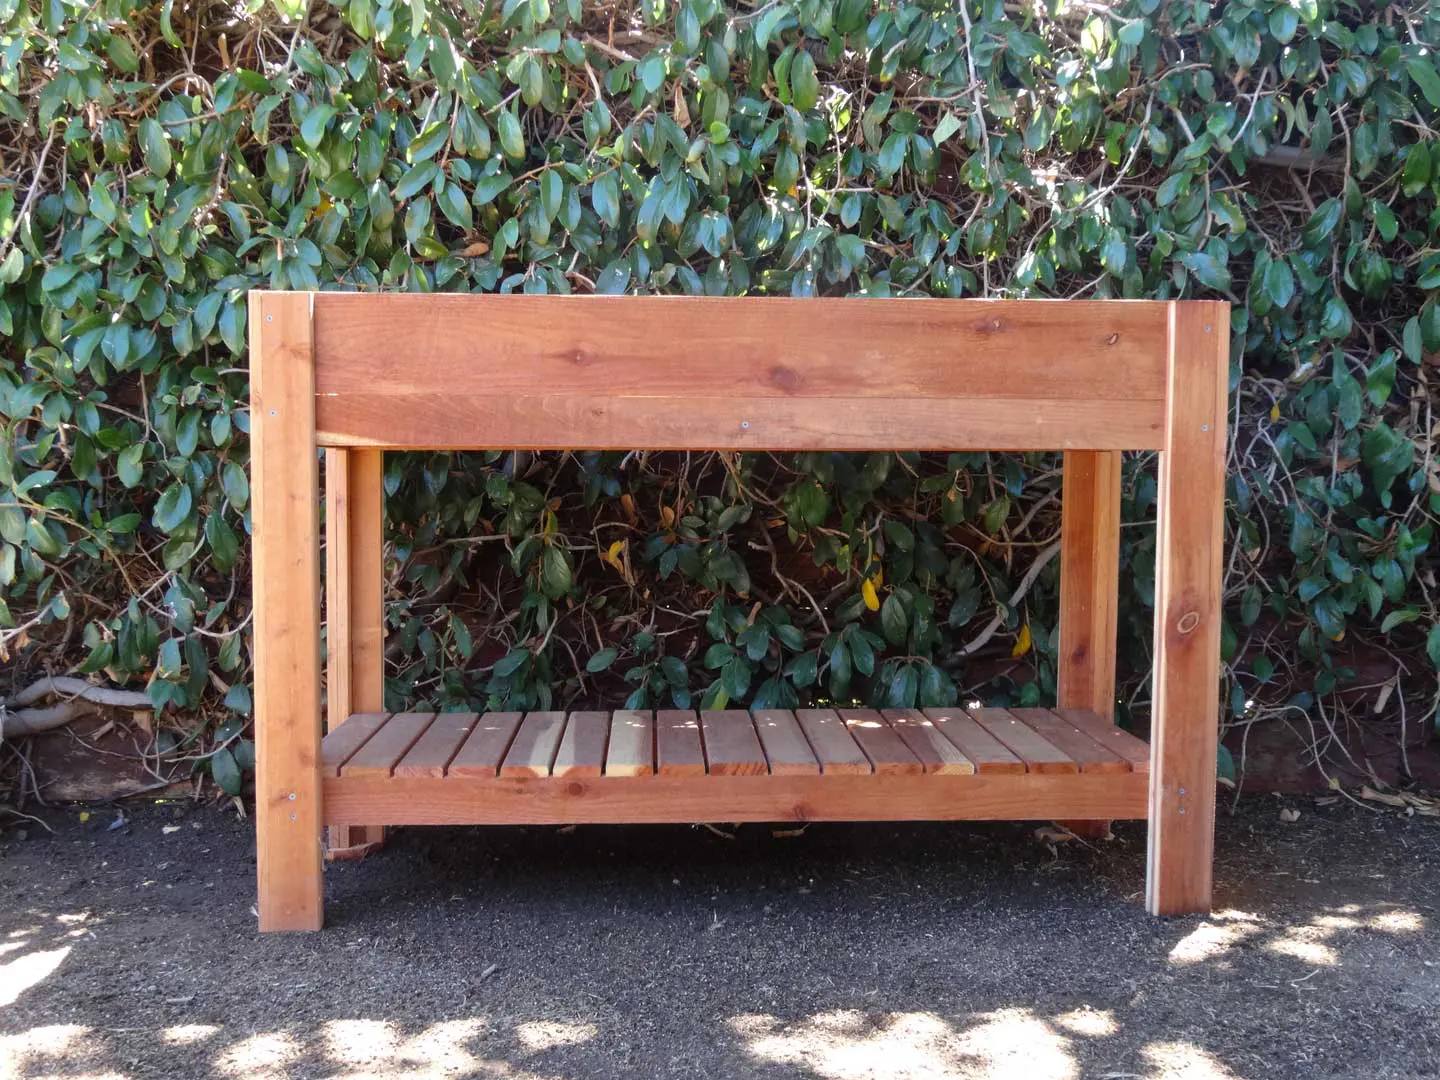 A wooden bench sitting in front of a bush.